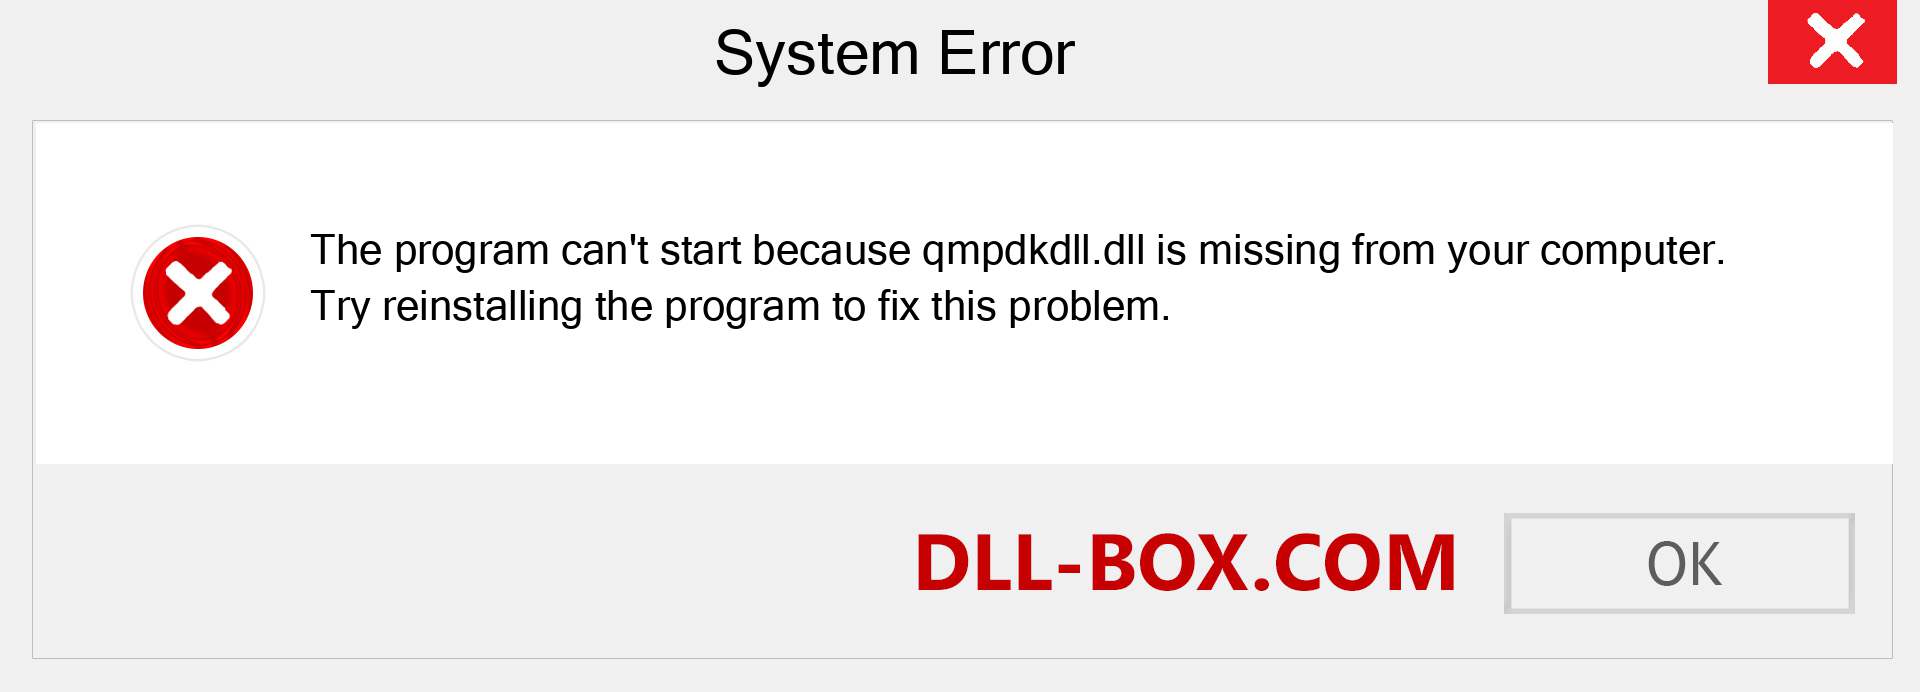  qmpdkdll.dll file is missing?. Download for Windows 7, 8, 10 - Fix  qmpdkdll dll Missing Error on Windows, photos, images